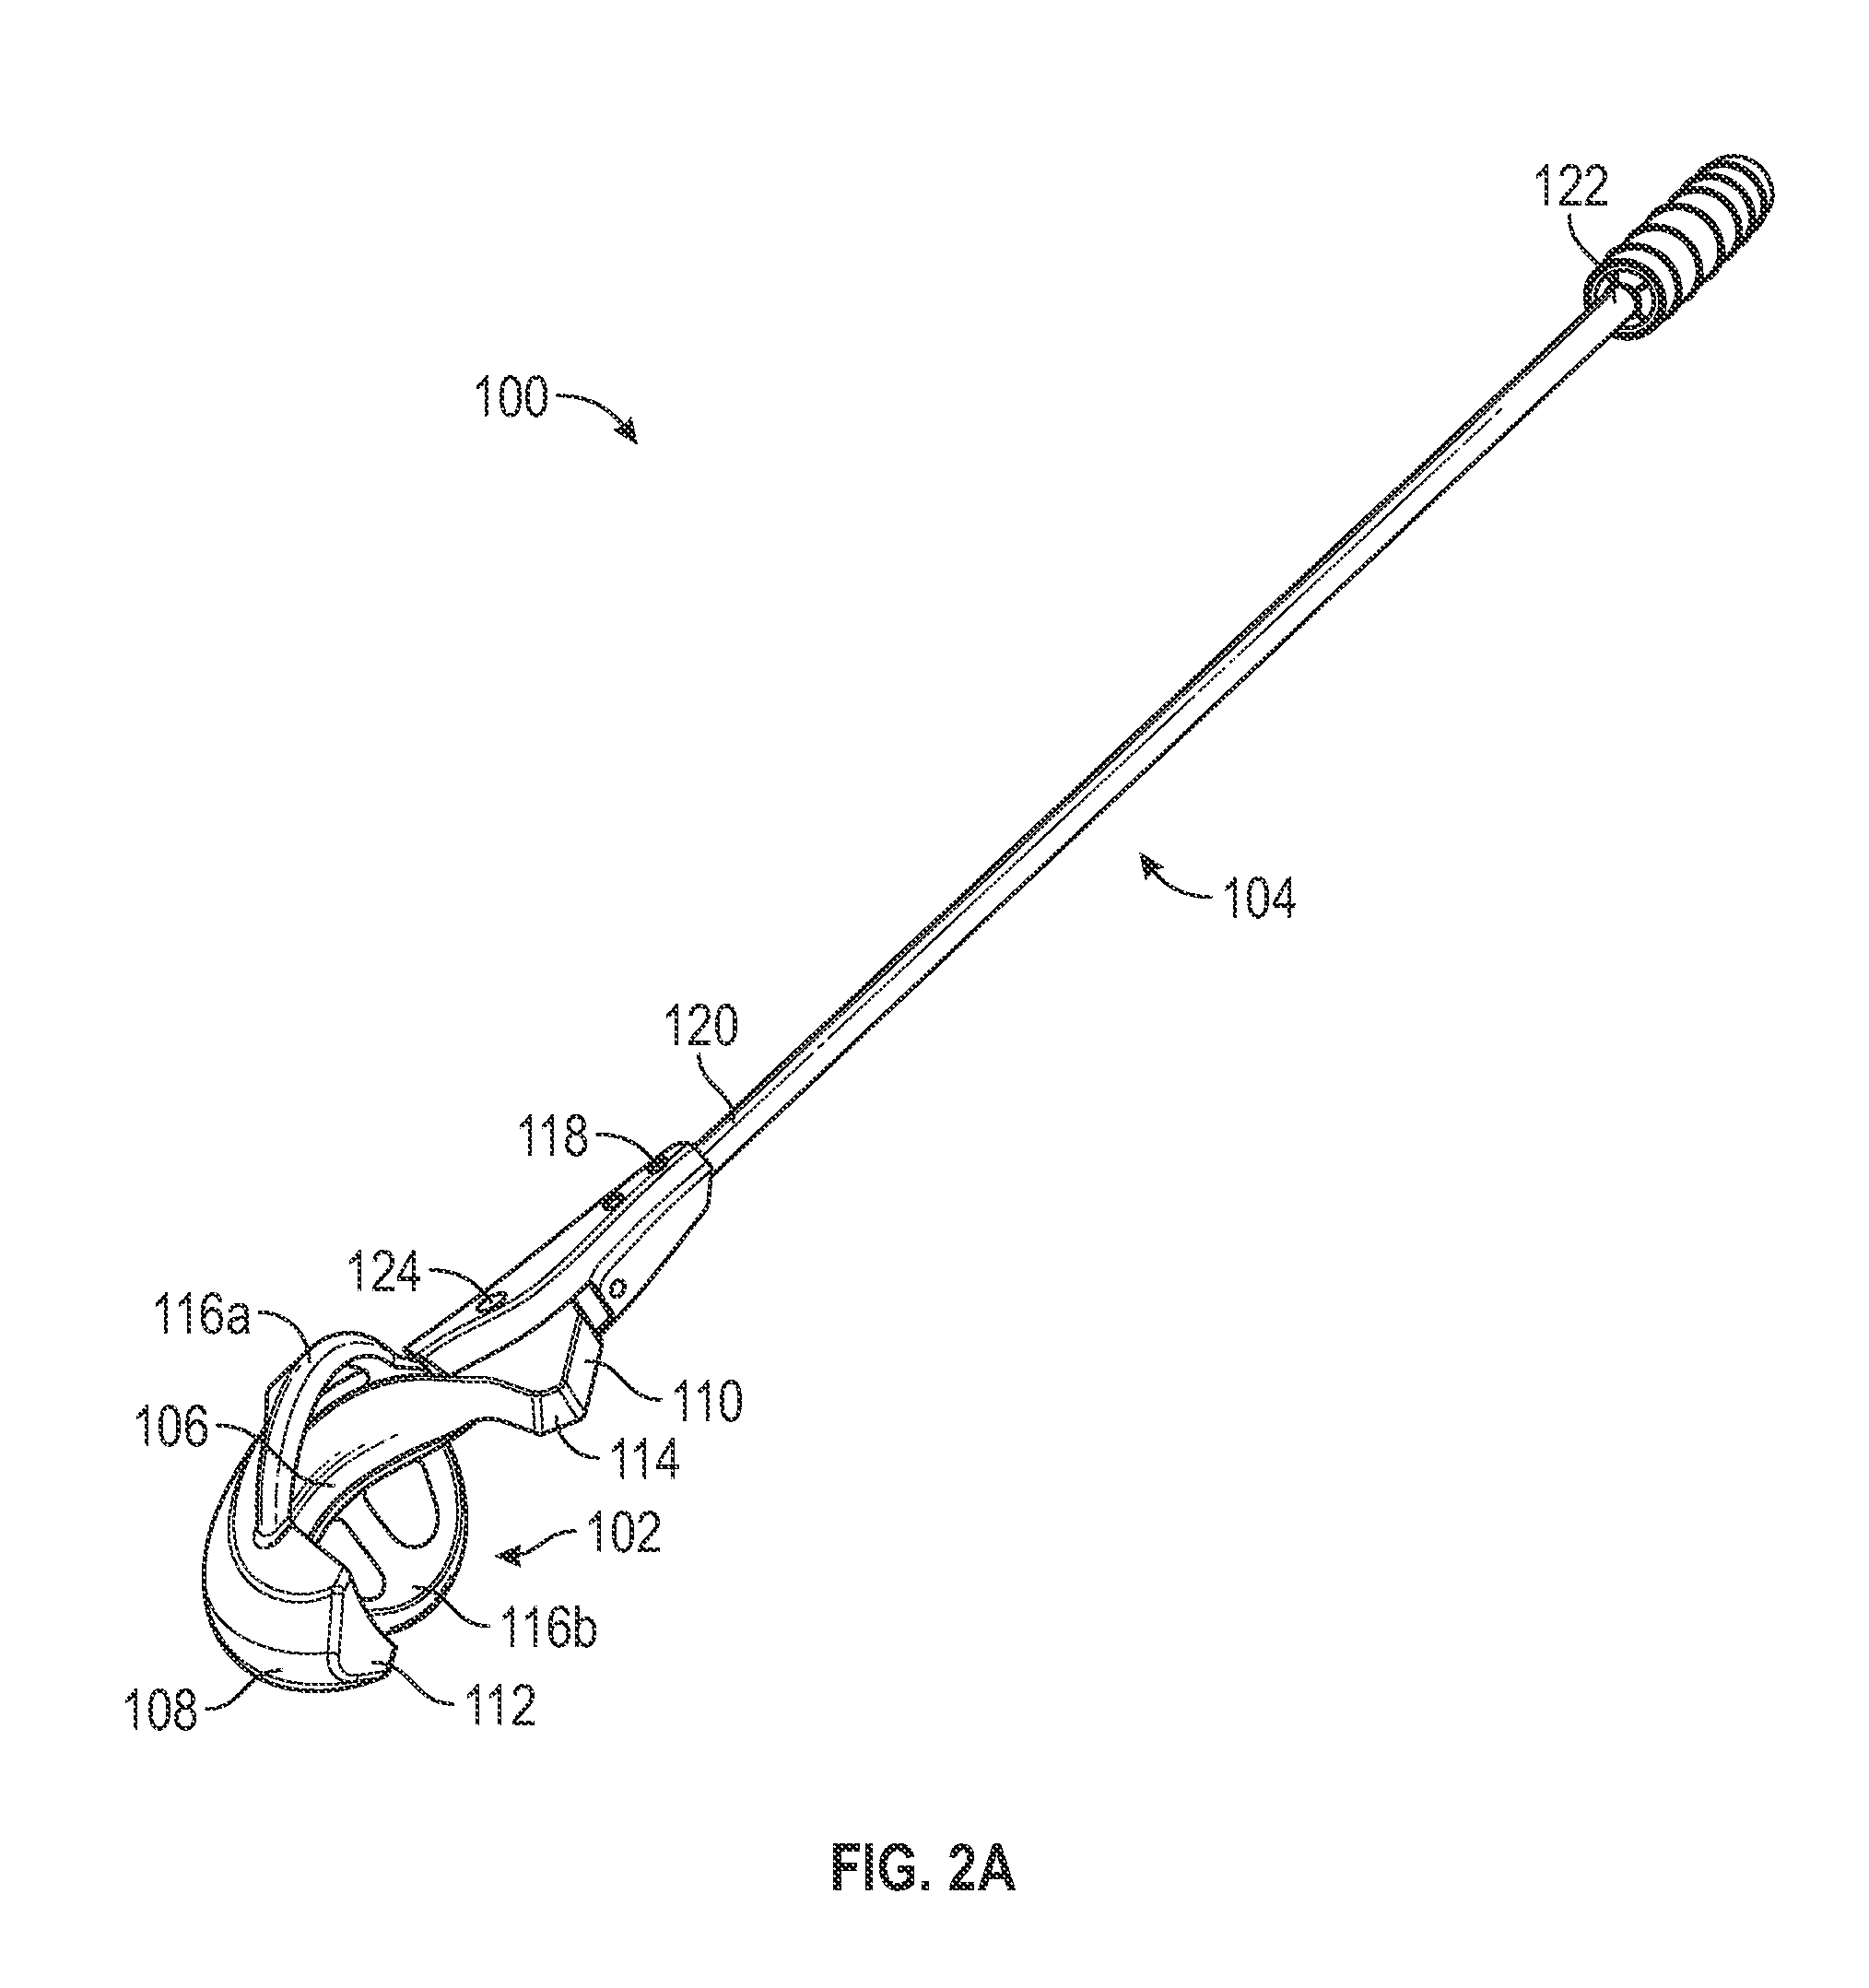 Device and method for launching a projectile across a range